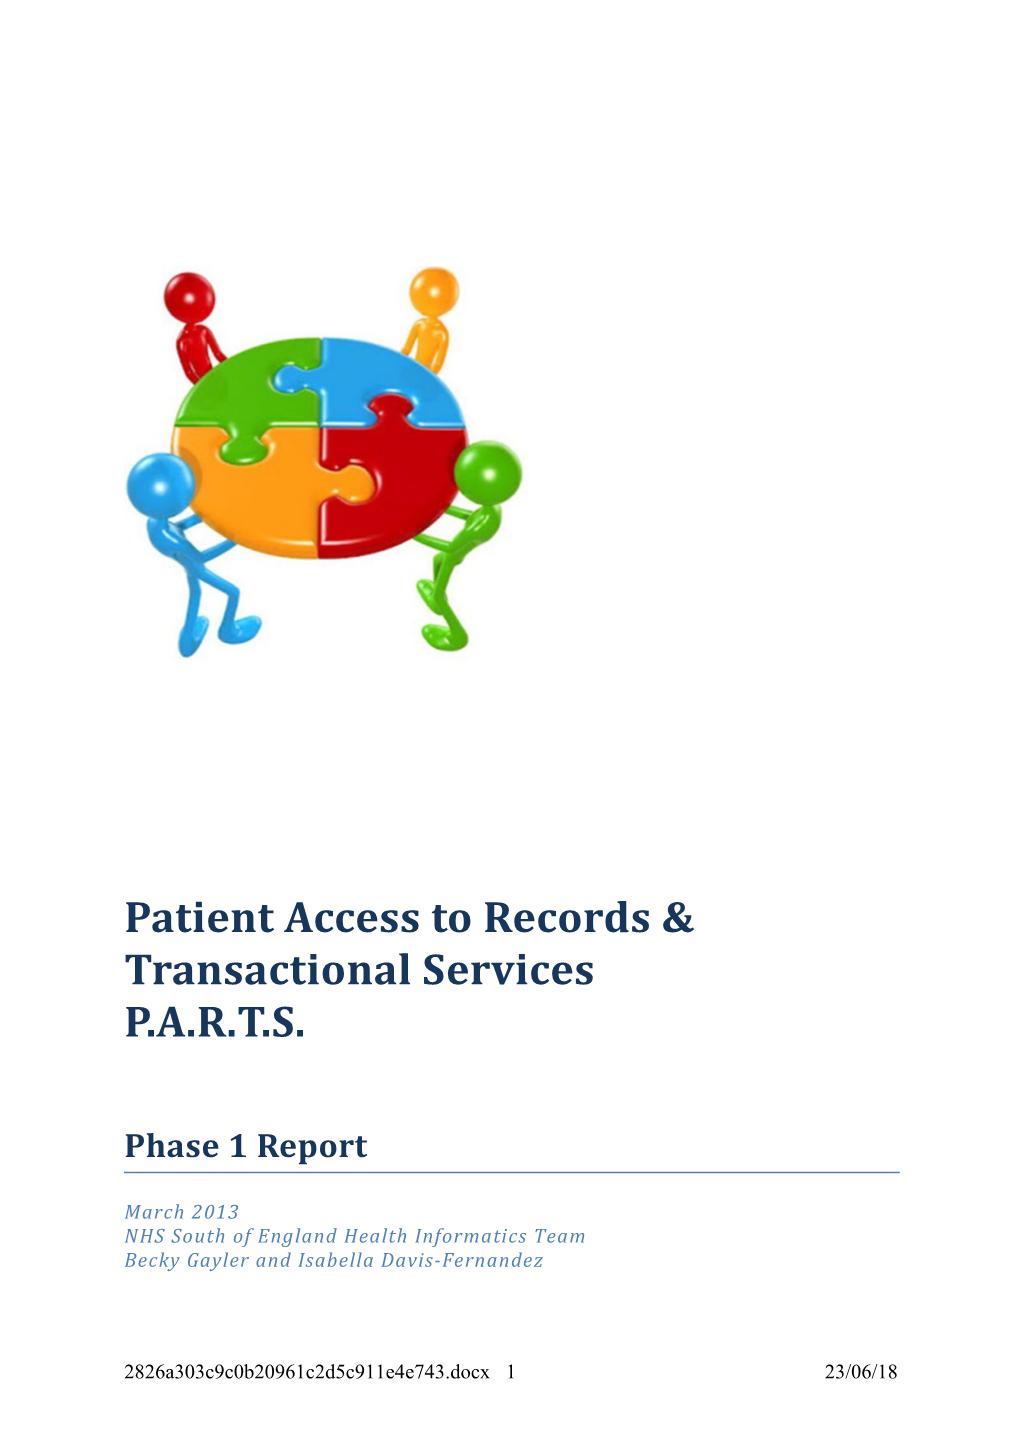 Patient Access to Records & Transactional Services P.A.R.T.S